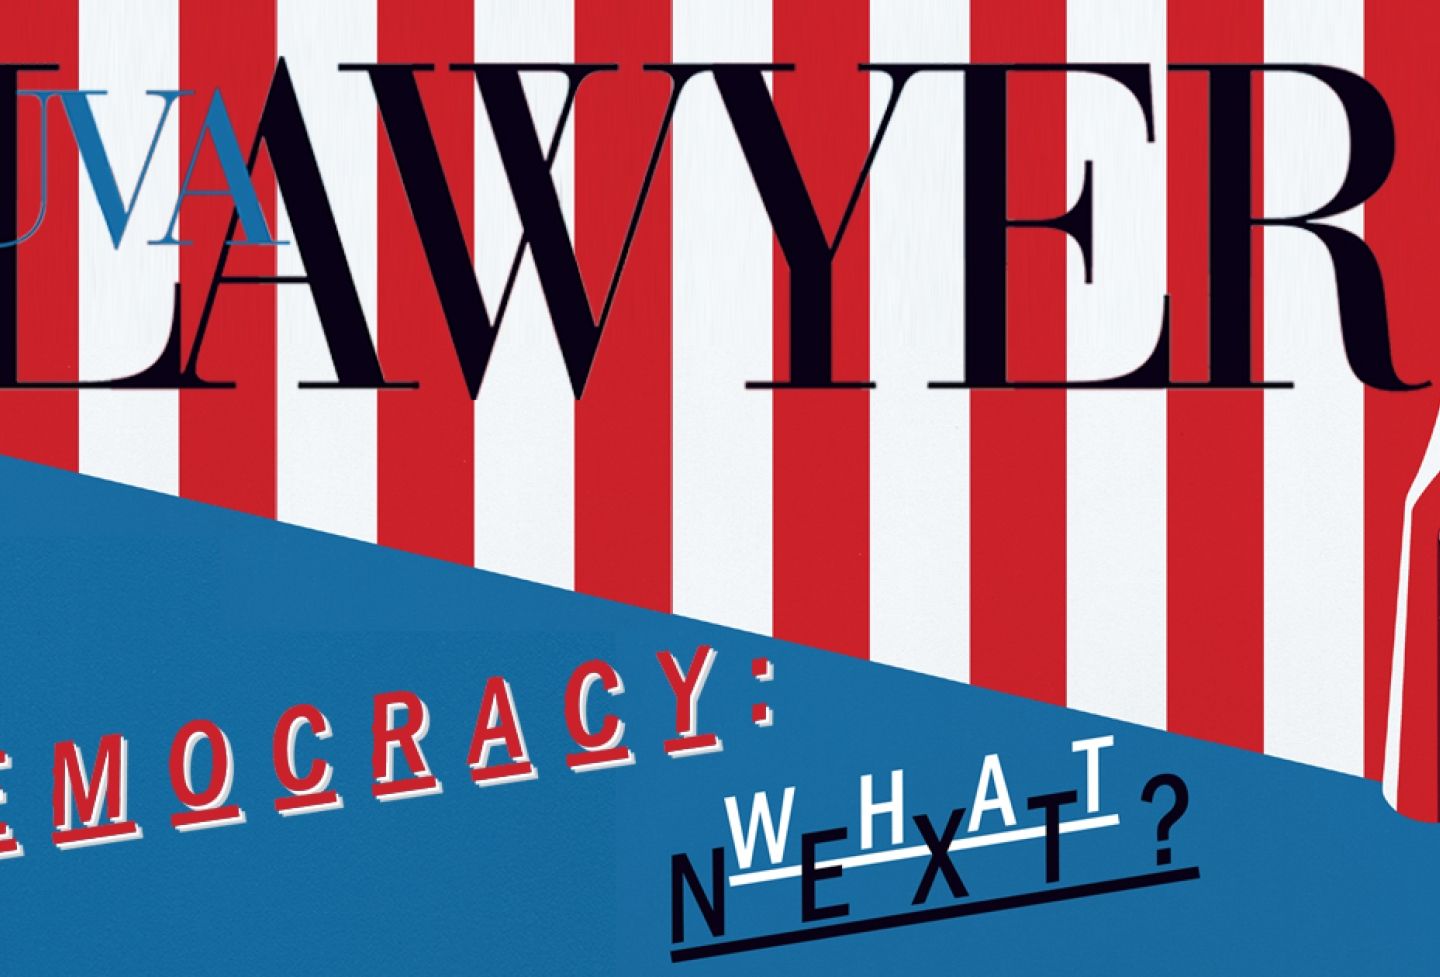 UVA Lawyer’s spring issue looked at what’s next for democracy, with perspectives from faculty and alumni.